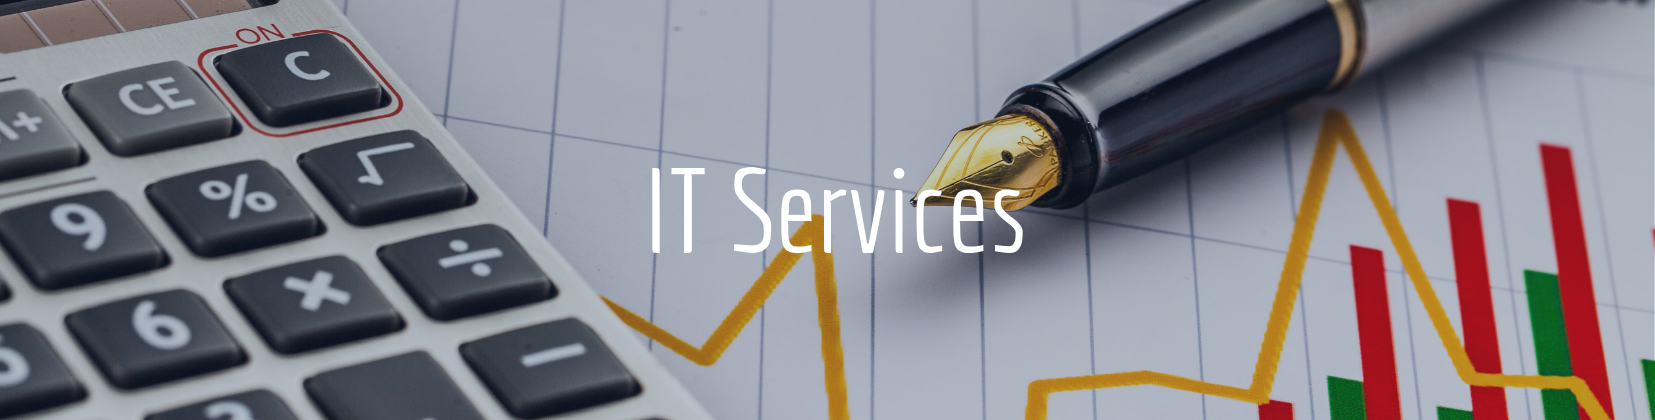 IT Services The IT Services provides administrative support to Information Technology (IT) departments.